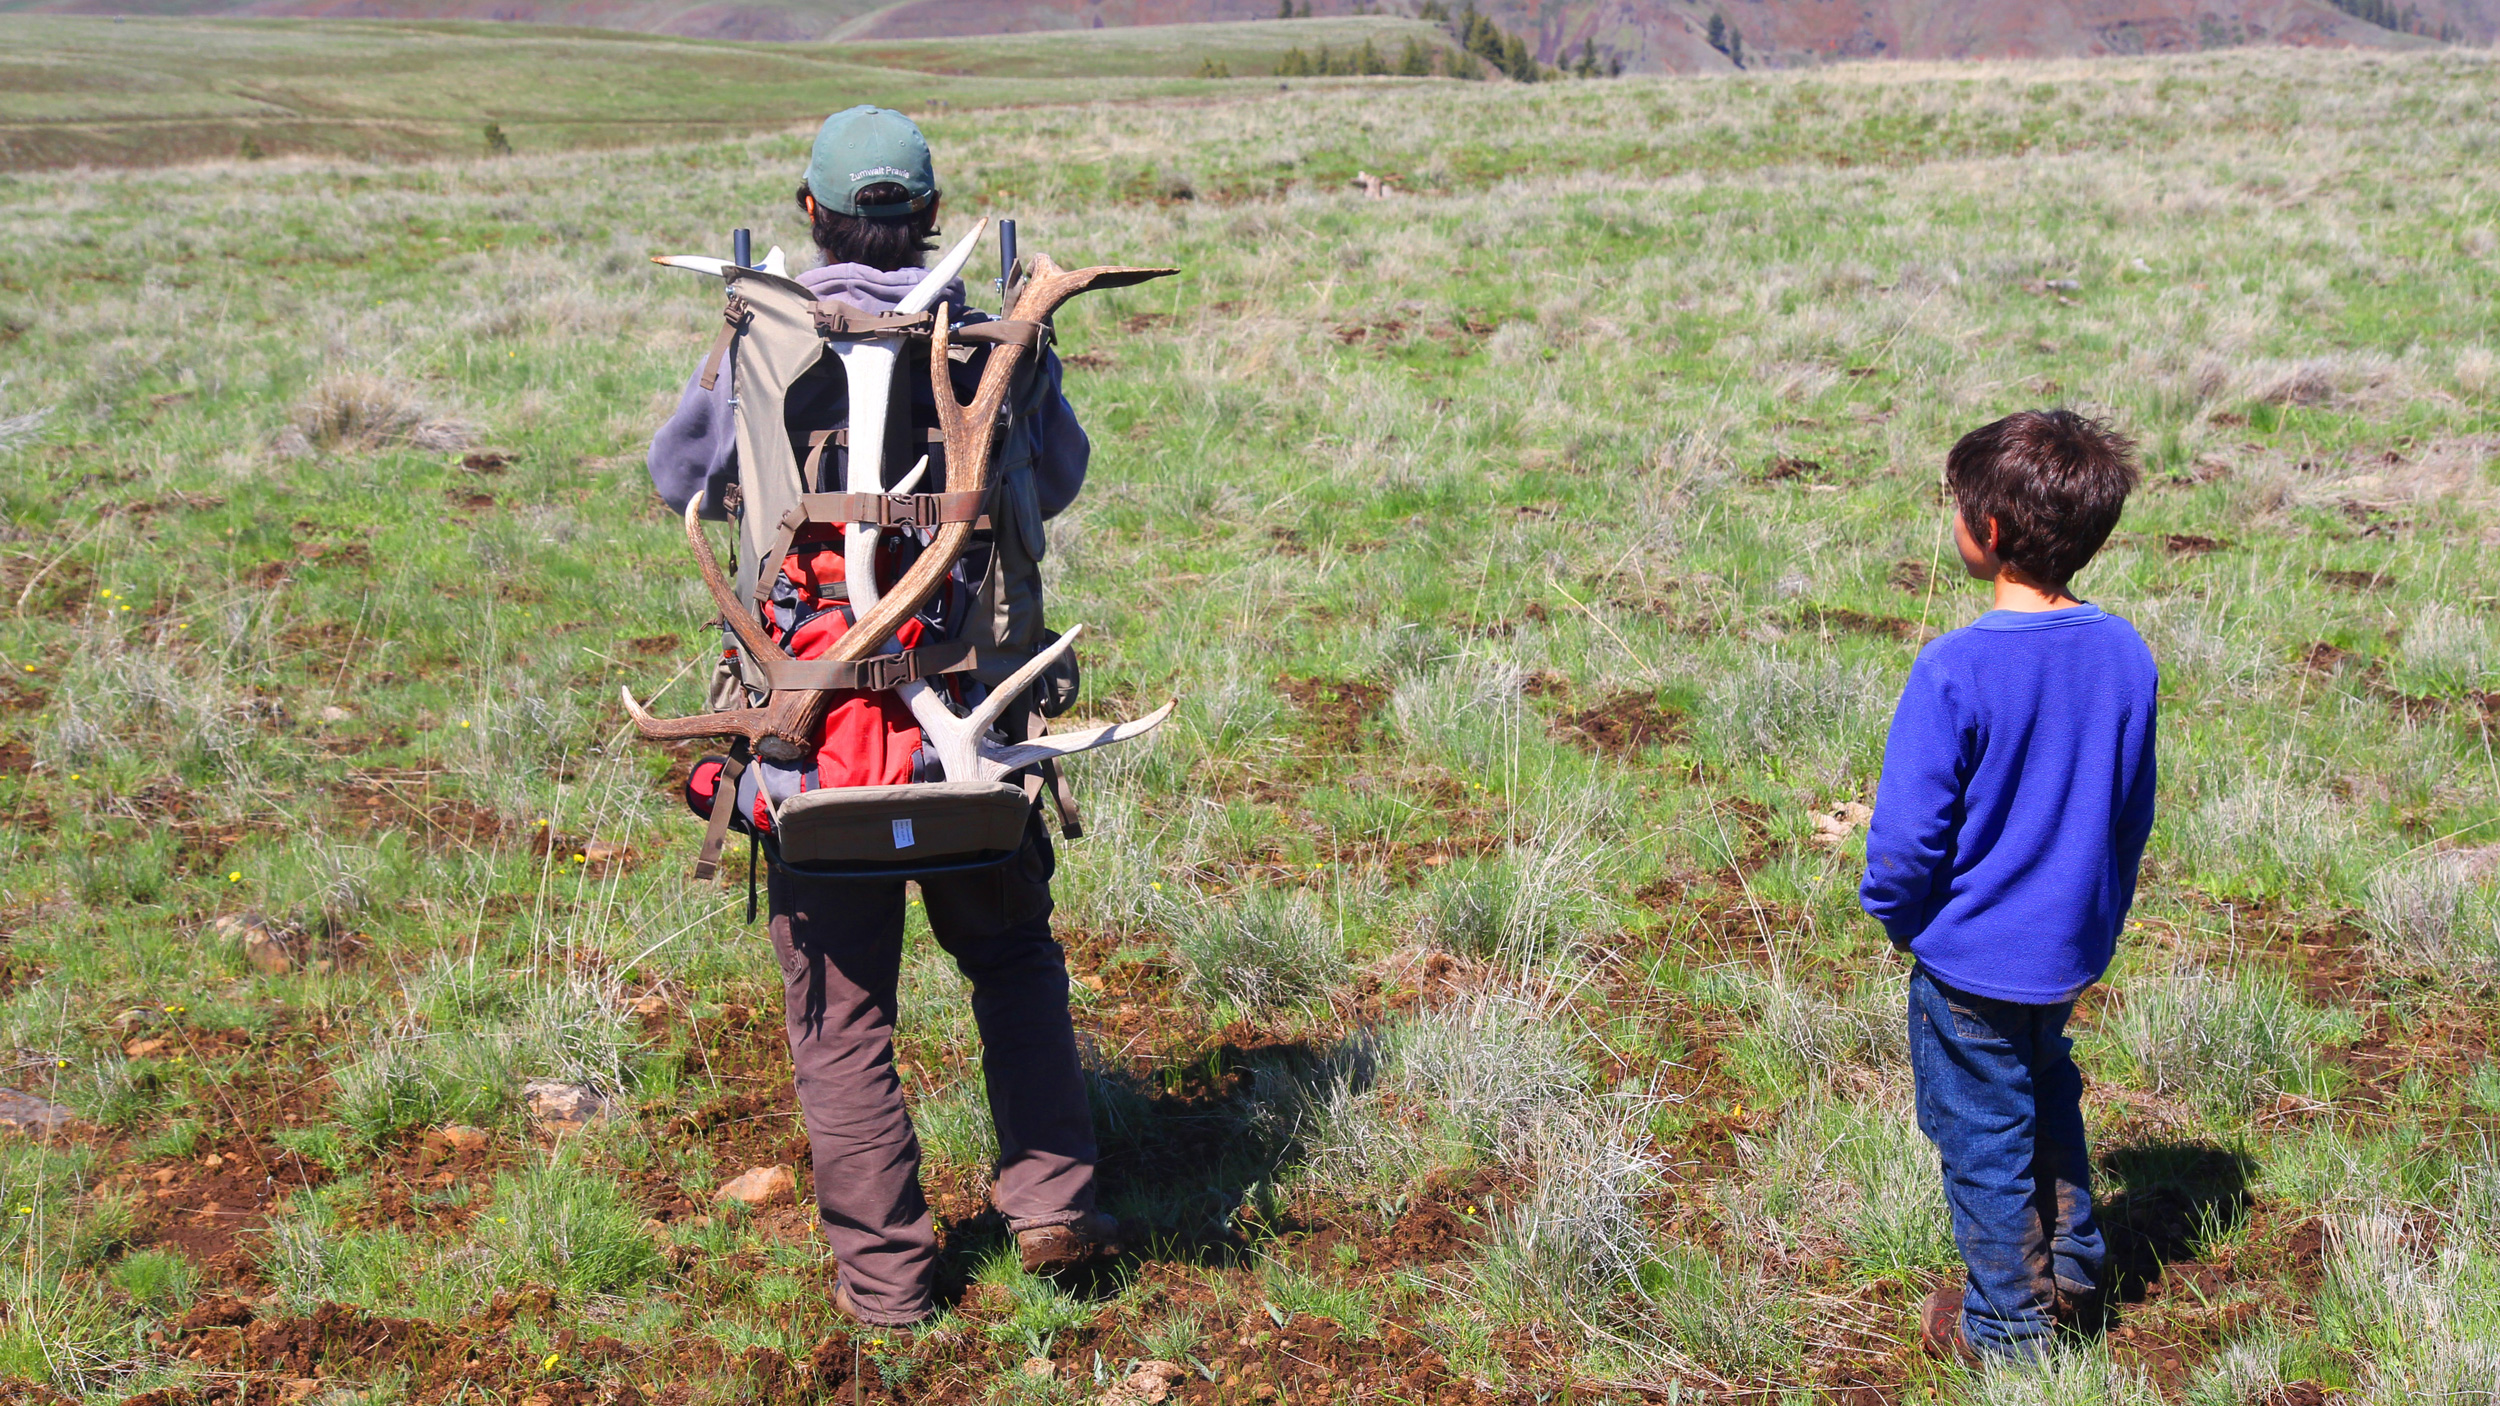 The Conservancy's Mike Beachy and his son search for antlers.  Photo © The Nature Conservancy (Matt Miller)